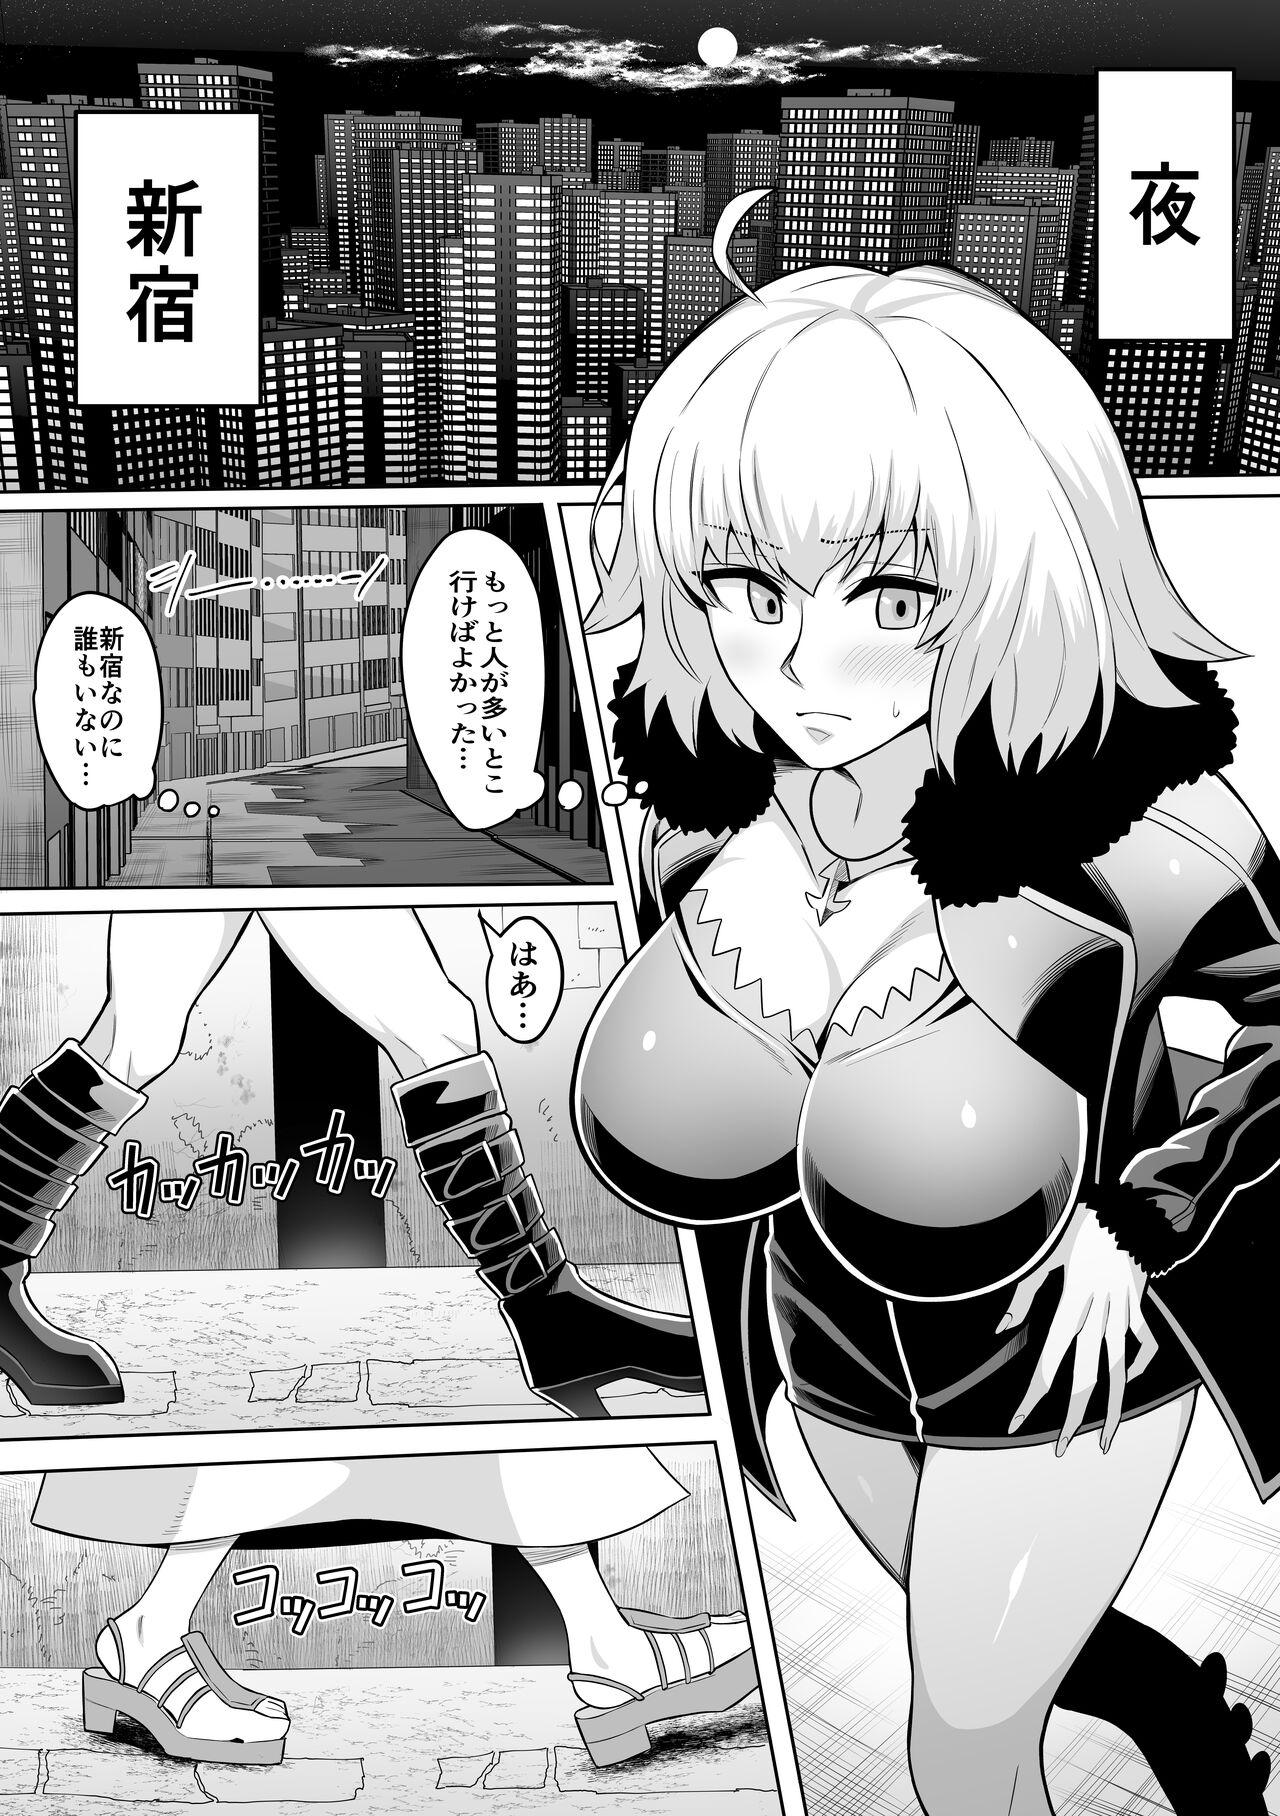 Freaky ジャンヌオルタ - Fate grand order Gay Group - Page 1